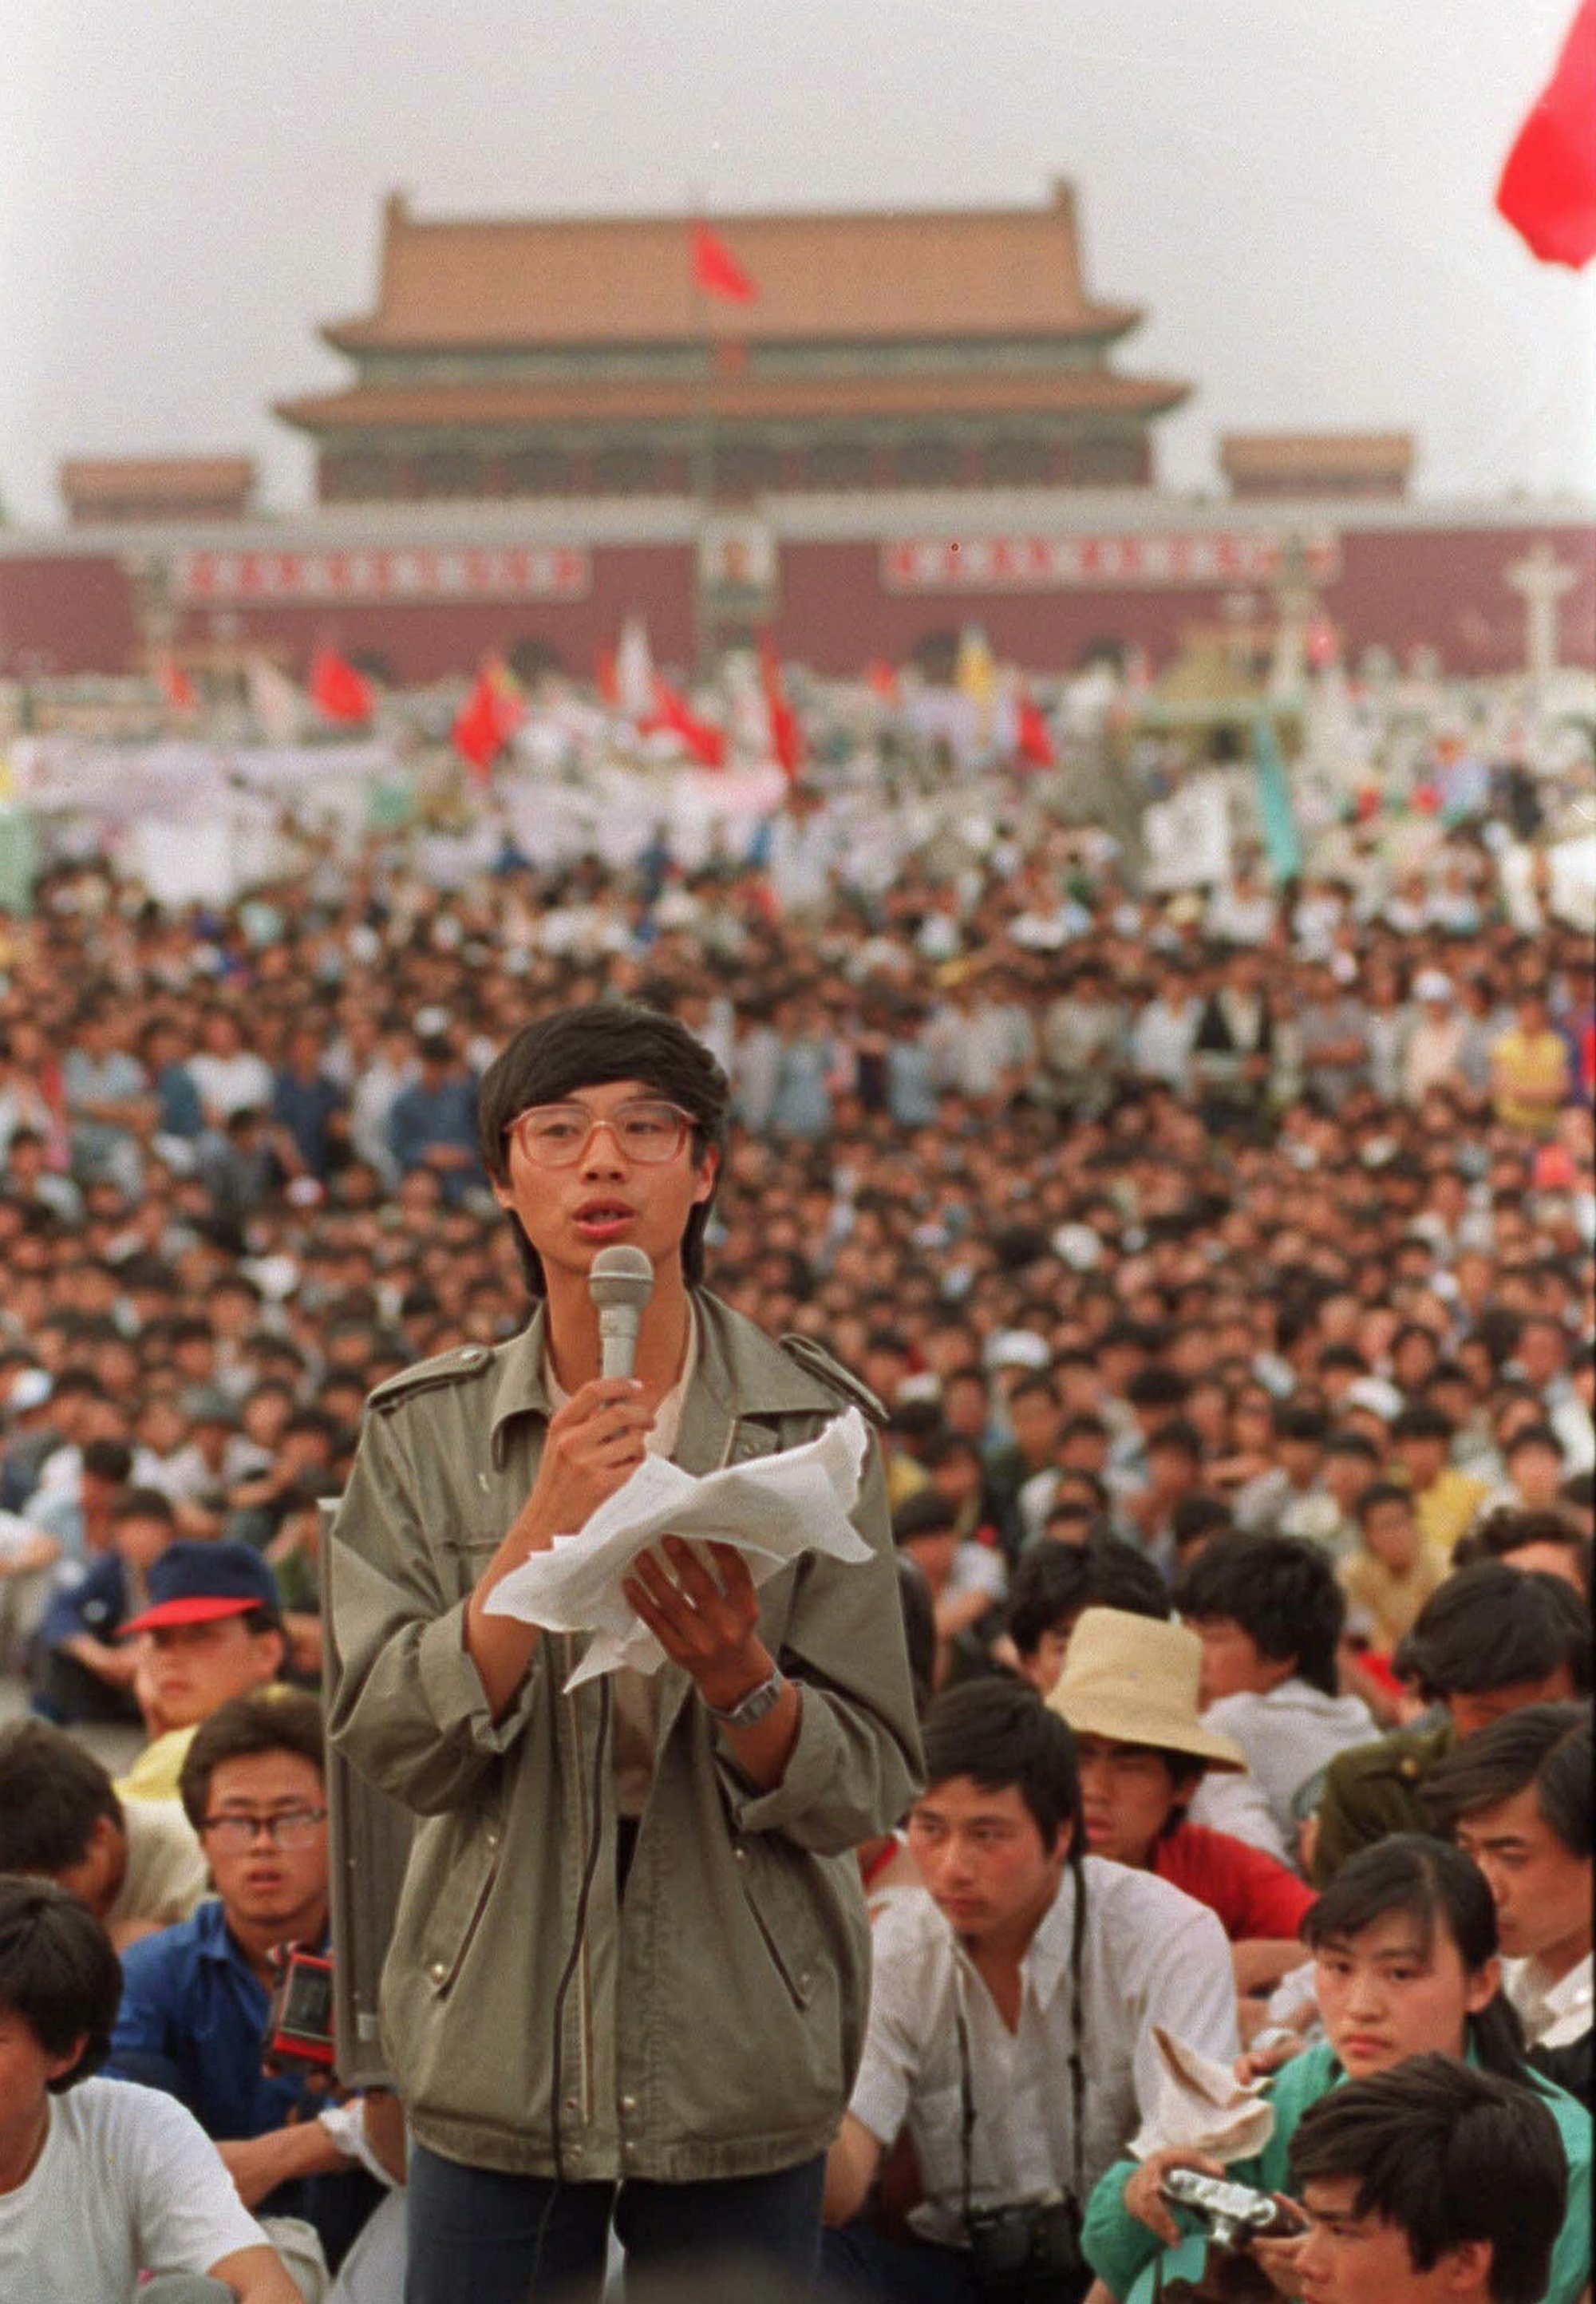 A Look At Key Events In The 1989 Tiananmen Square Protests